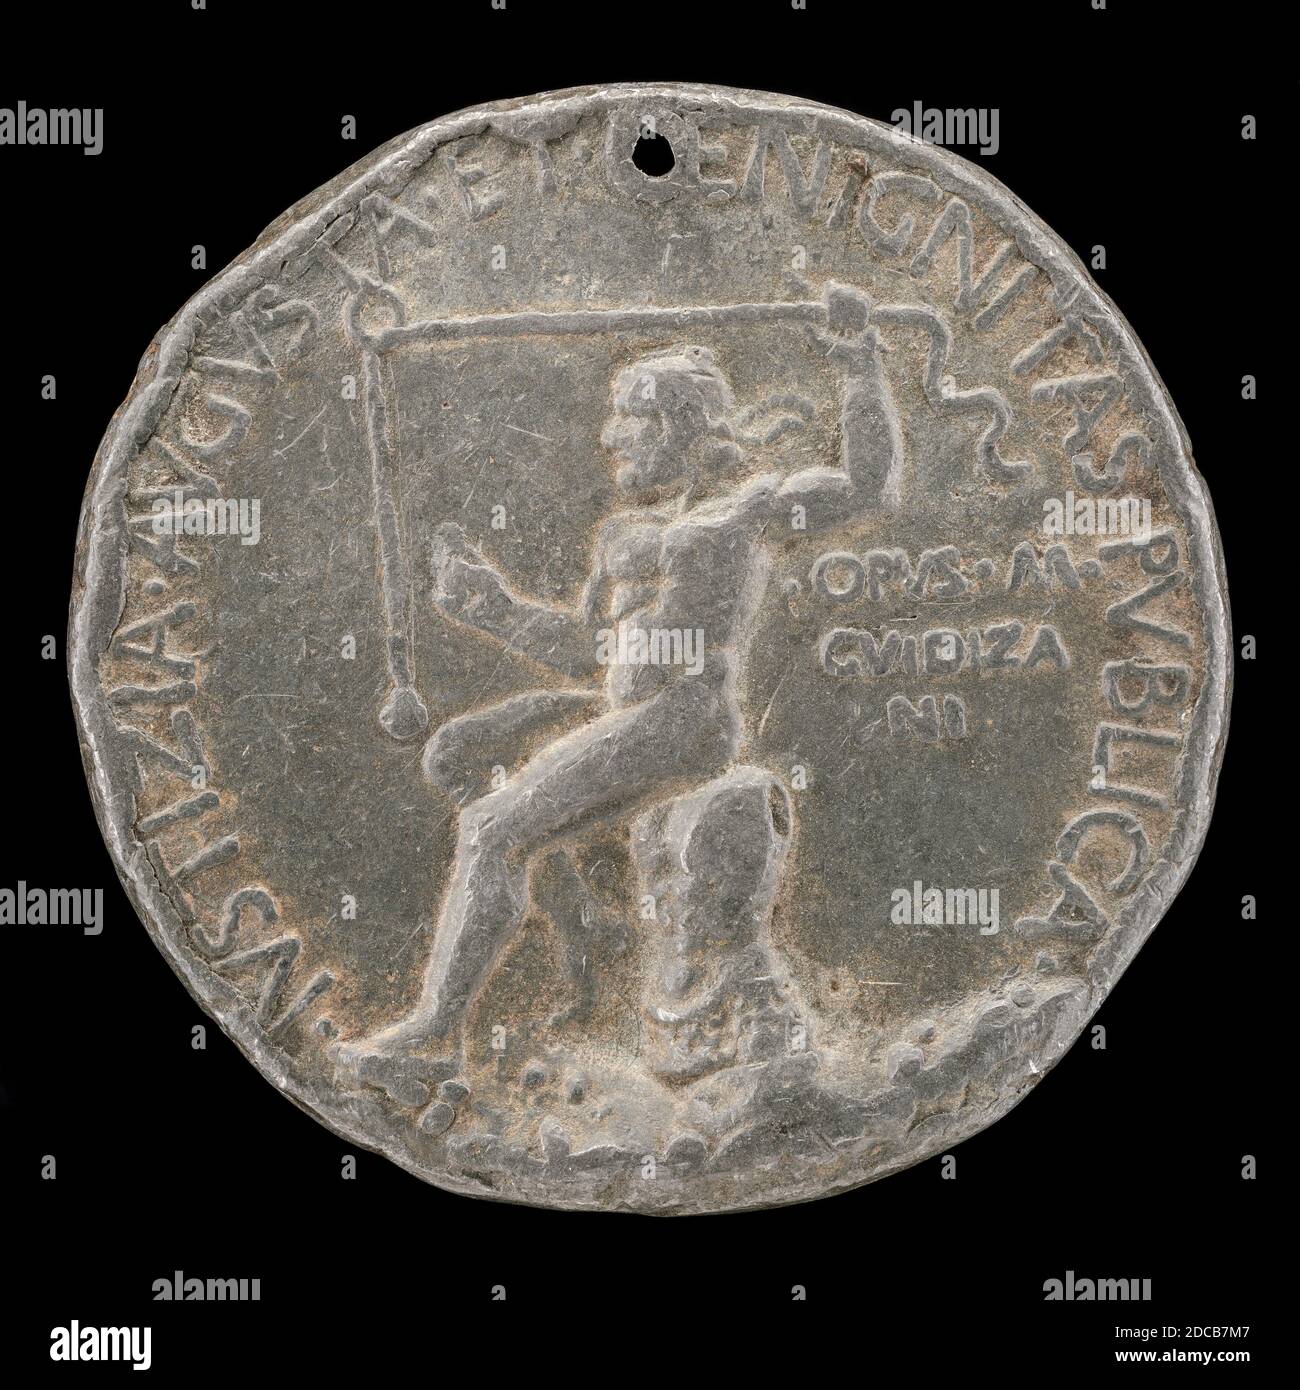 Marco Guidizani, (artist), Venetian, active 1454/1462, Laureate Figure Holding a Plummet Line, 1454 or after, lead, overall (diameter): 8.3 cm (3 1/4 in.), gross weight: 322.41 gr (0.711 lb.), axis: 12:00 Stock Photo